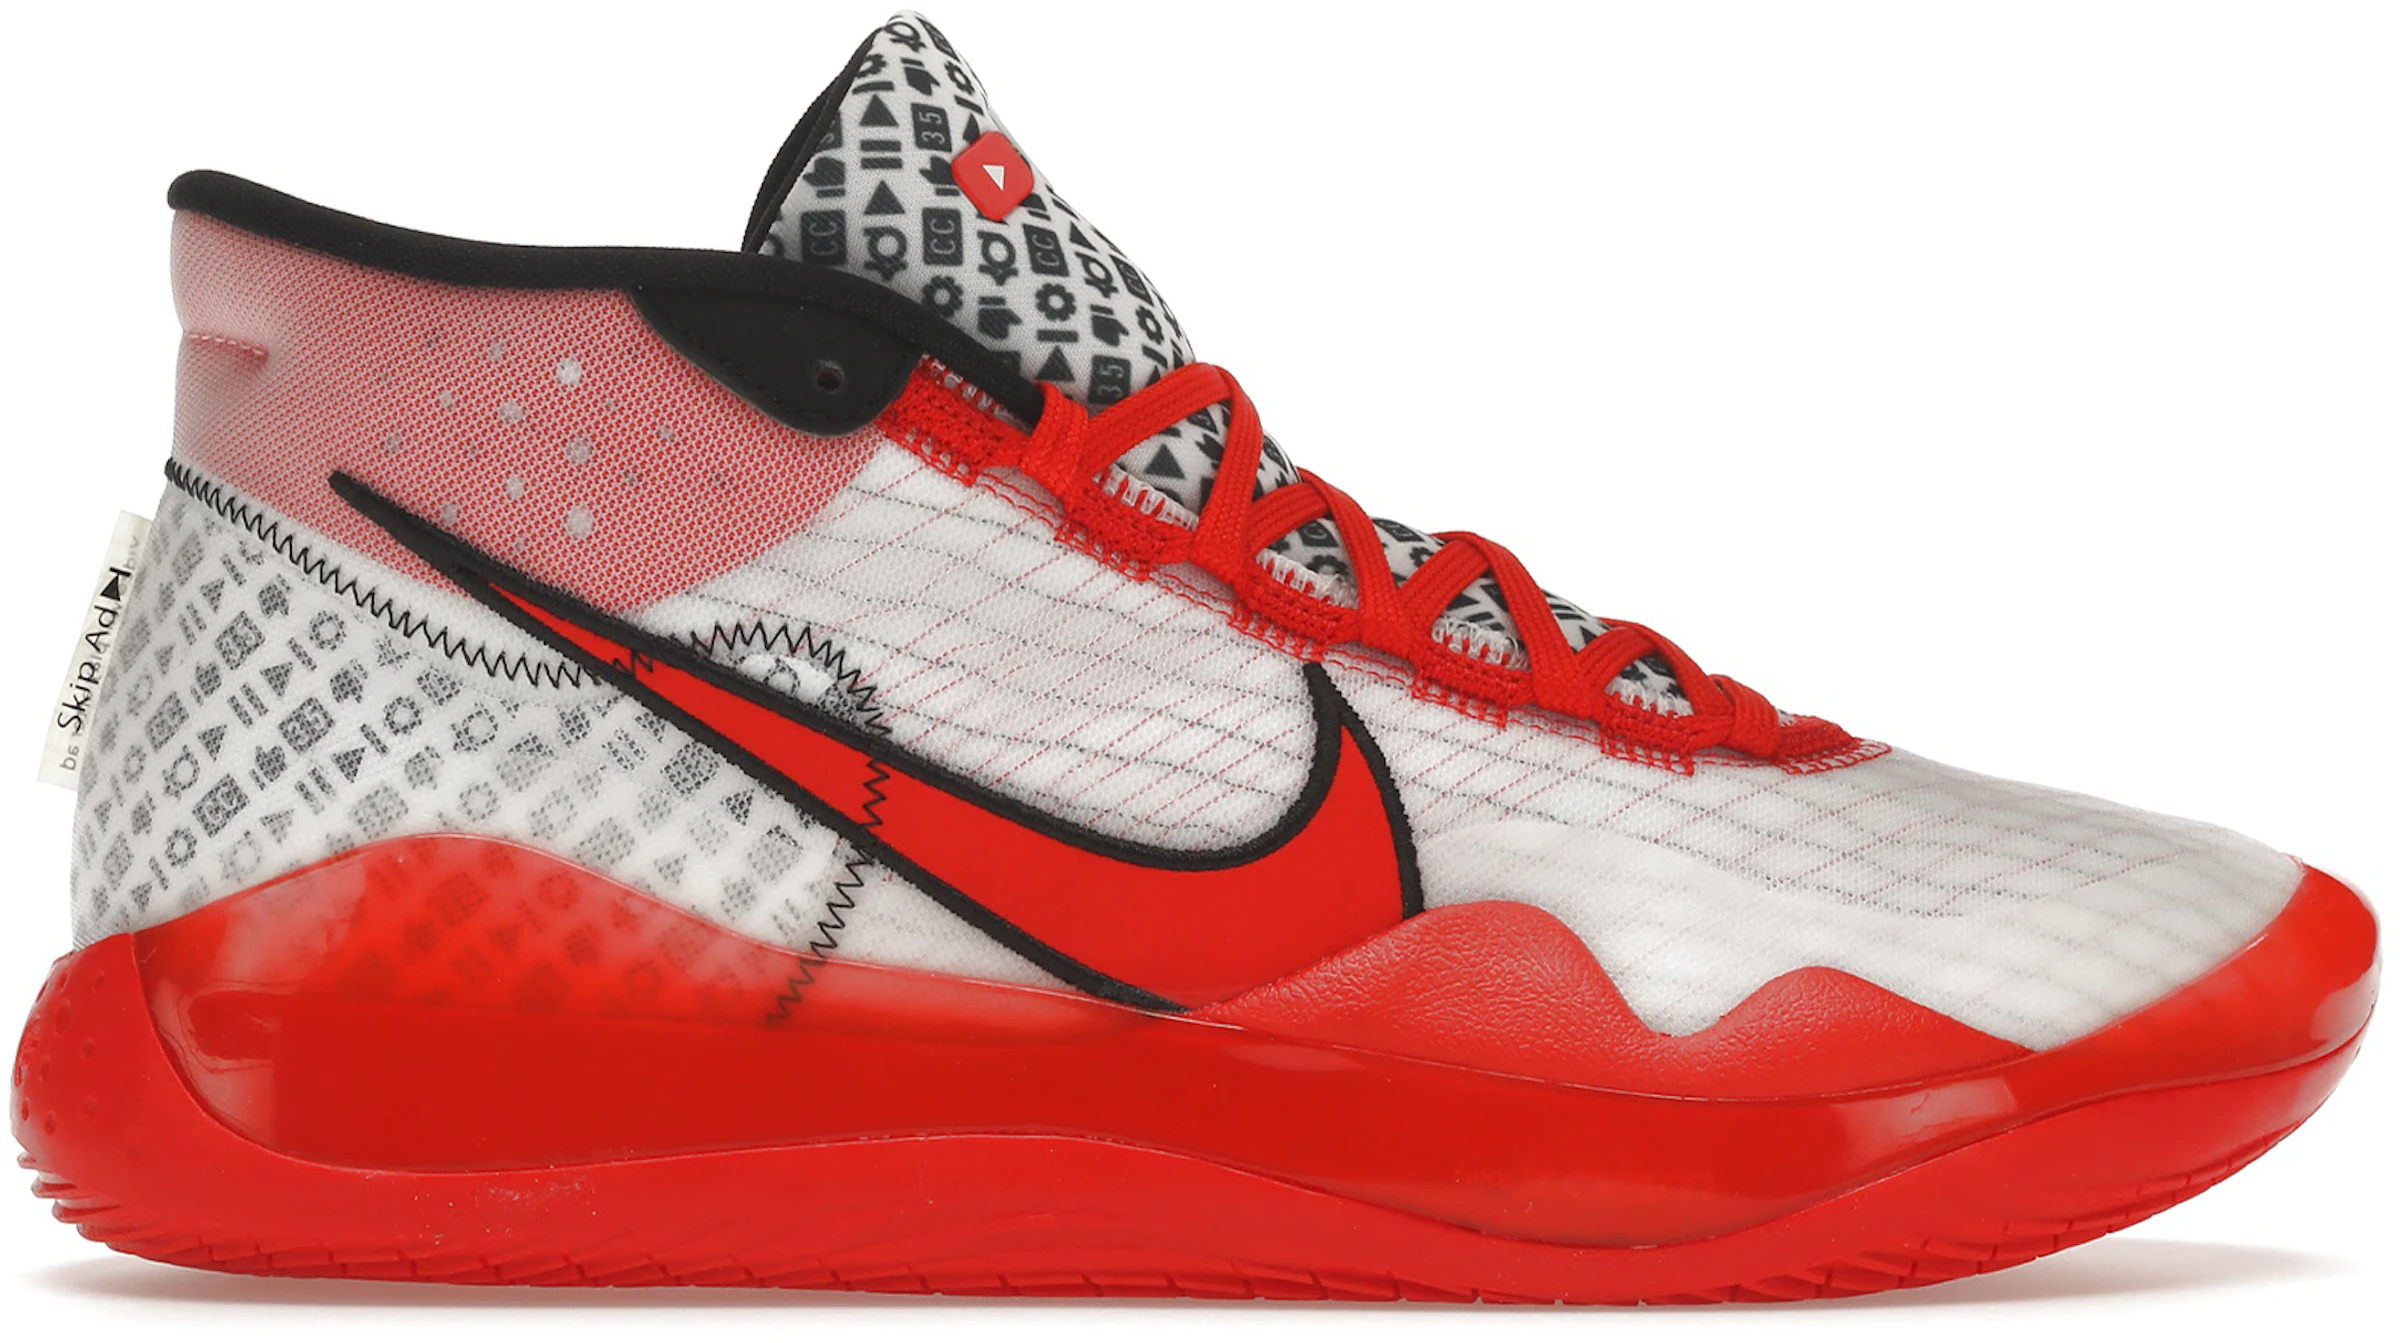 Buy Nike KD 12 Shoes & New Sneakers - StockX